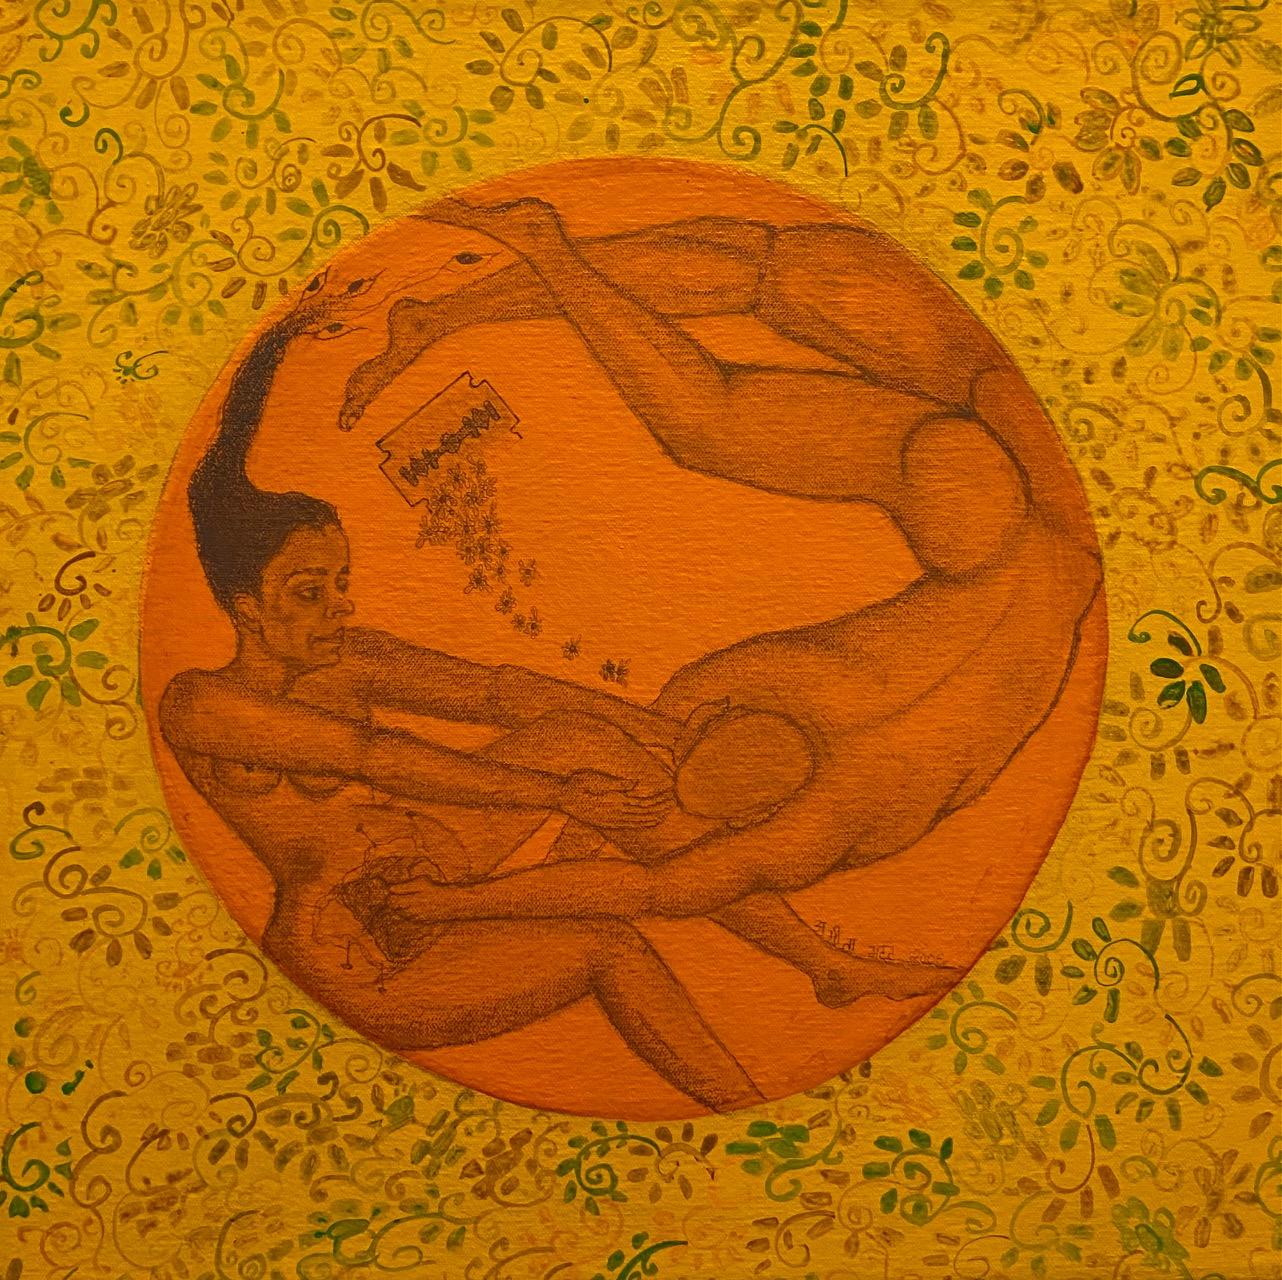 Amita Bhatt Figurative Painting - Tat Tvam Asi - You Are Me, Graphite and Acrylic on Canvas, Symbolism, Indian Art